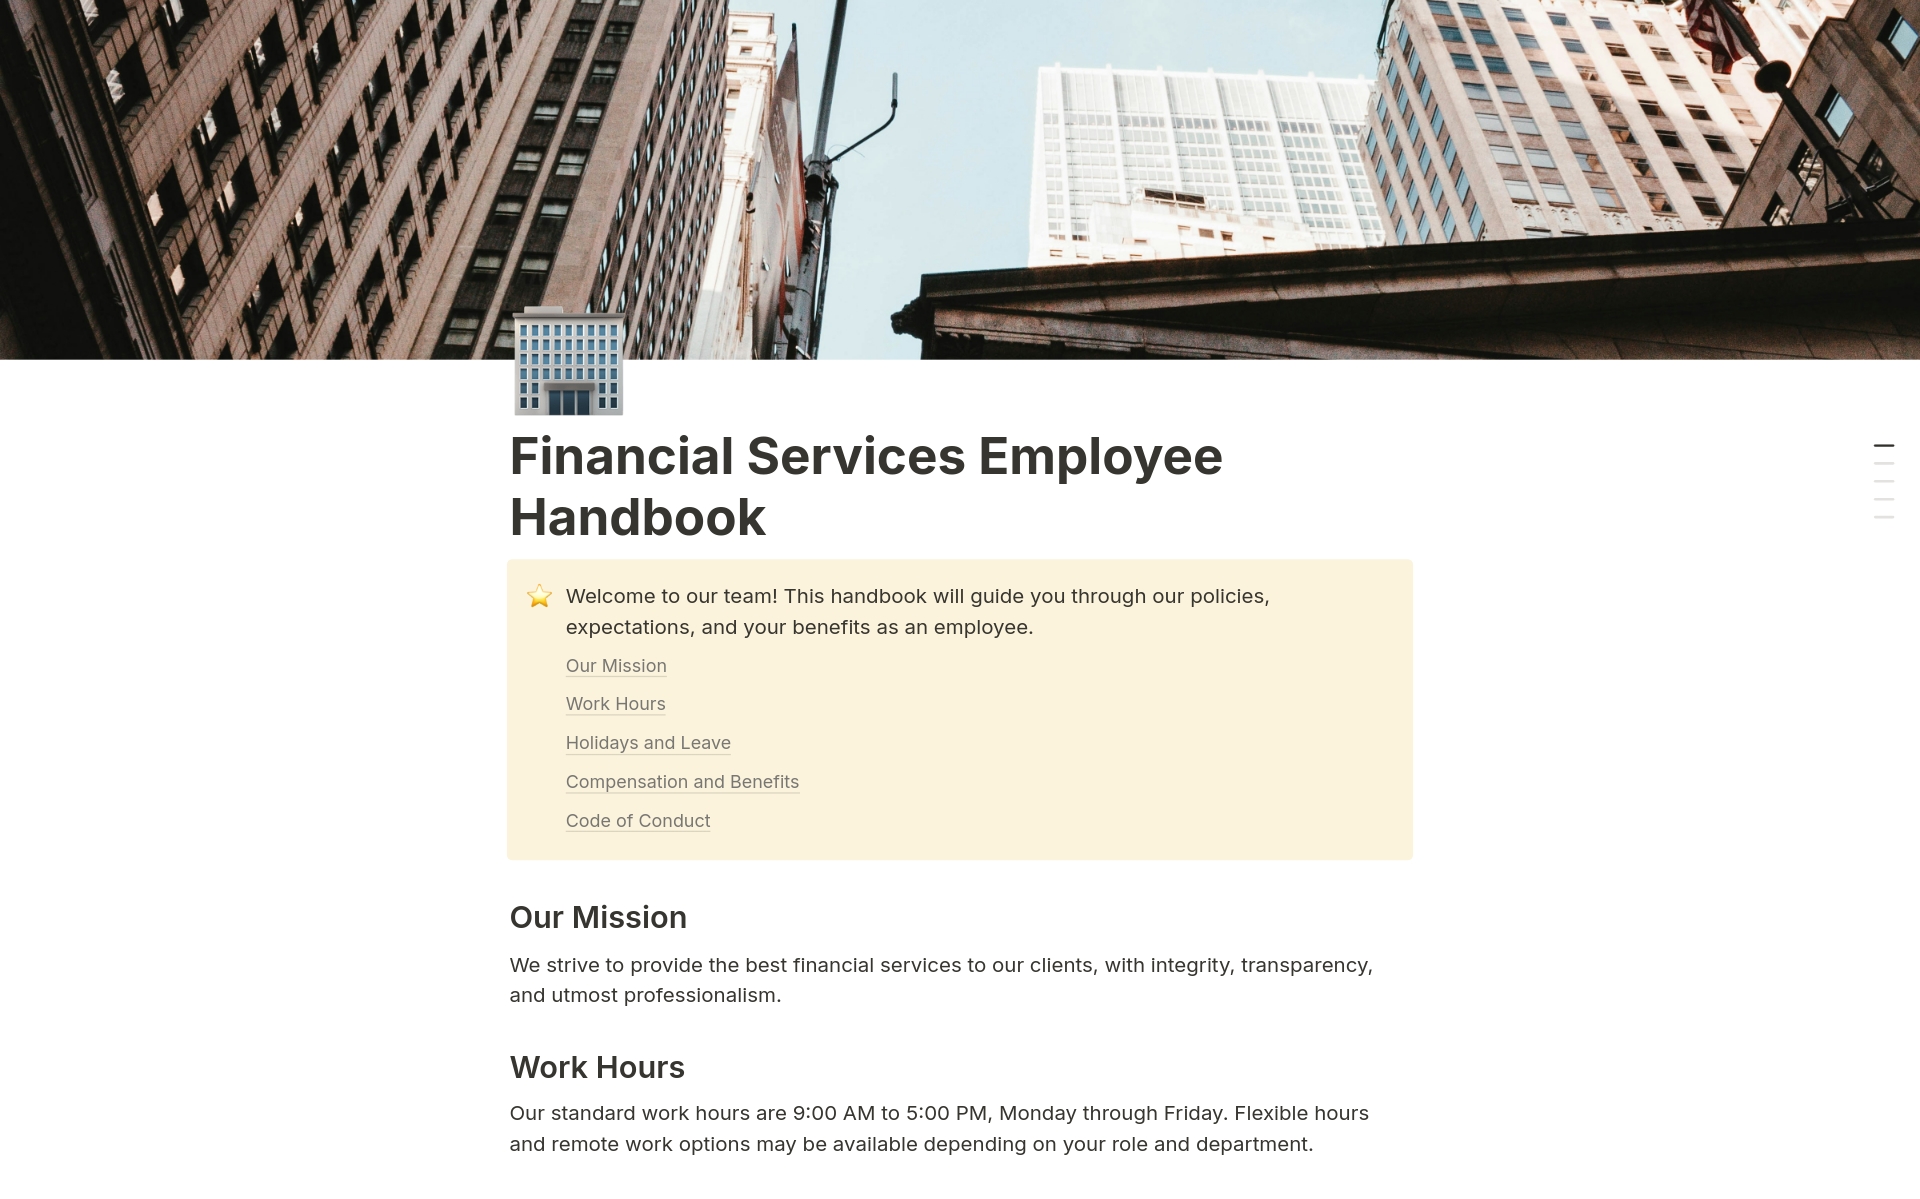 Comprehensive handbook for financial services employees, detailing compliance standards, client protocols, and company policies.